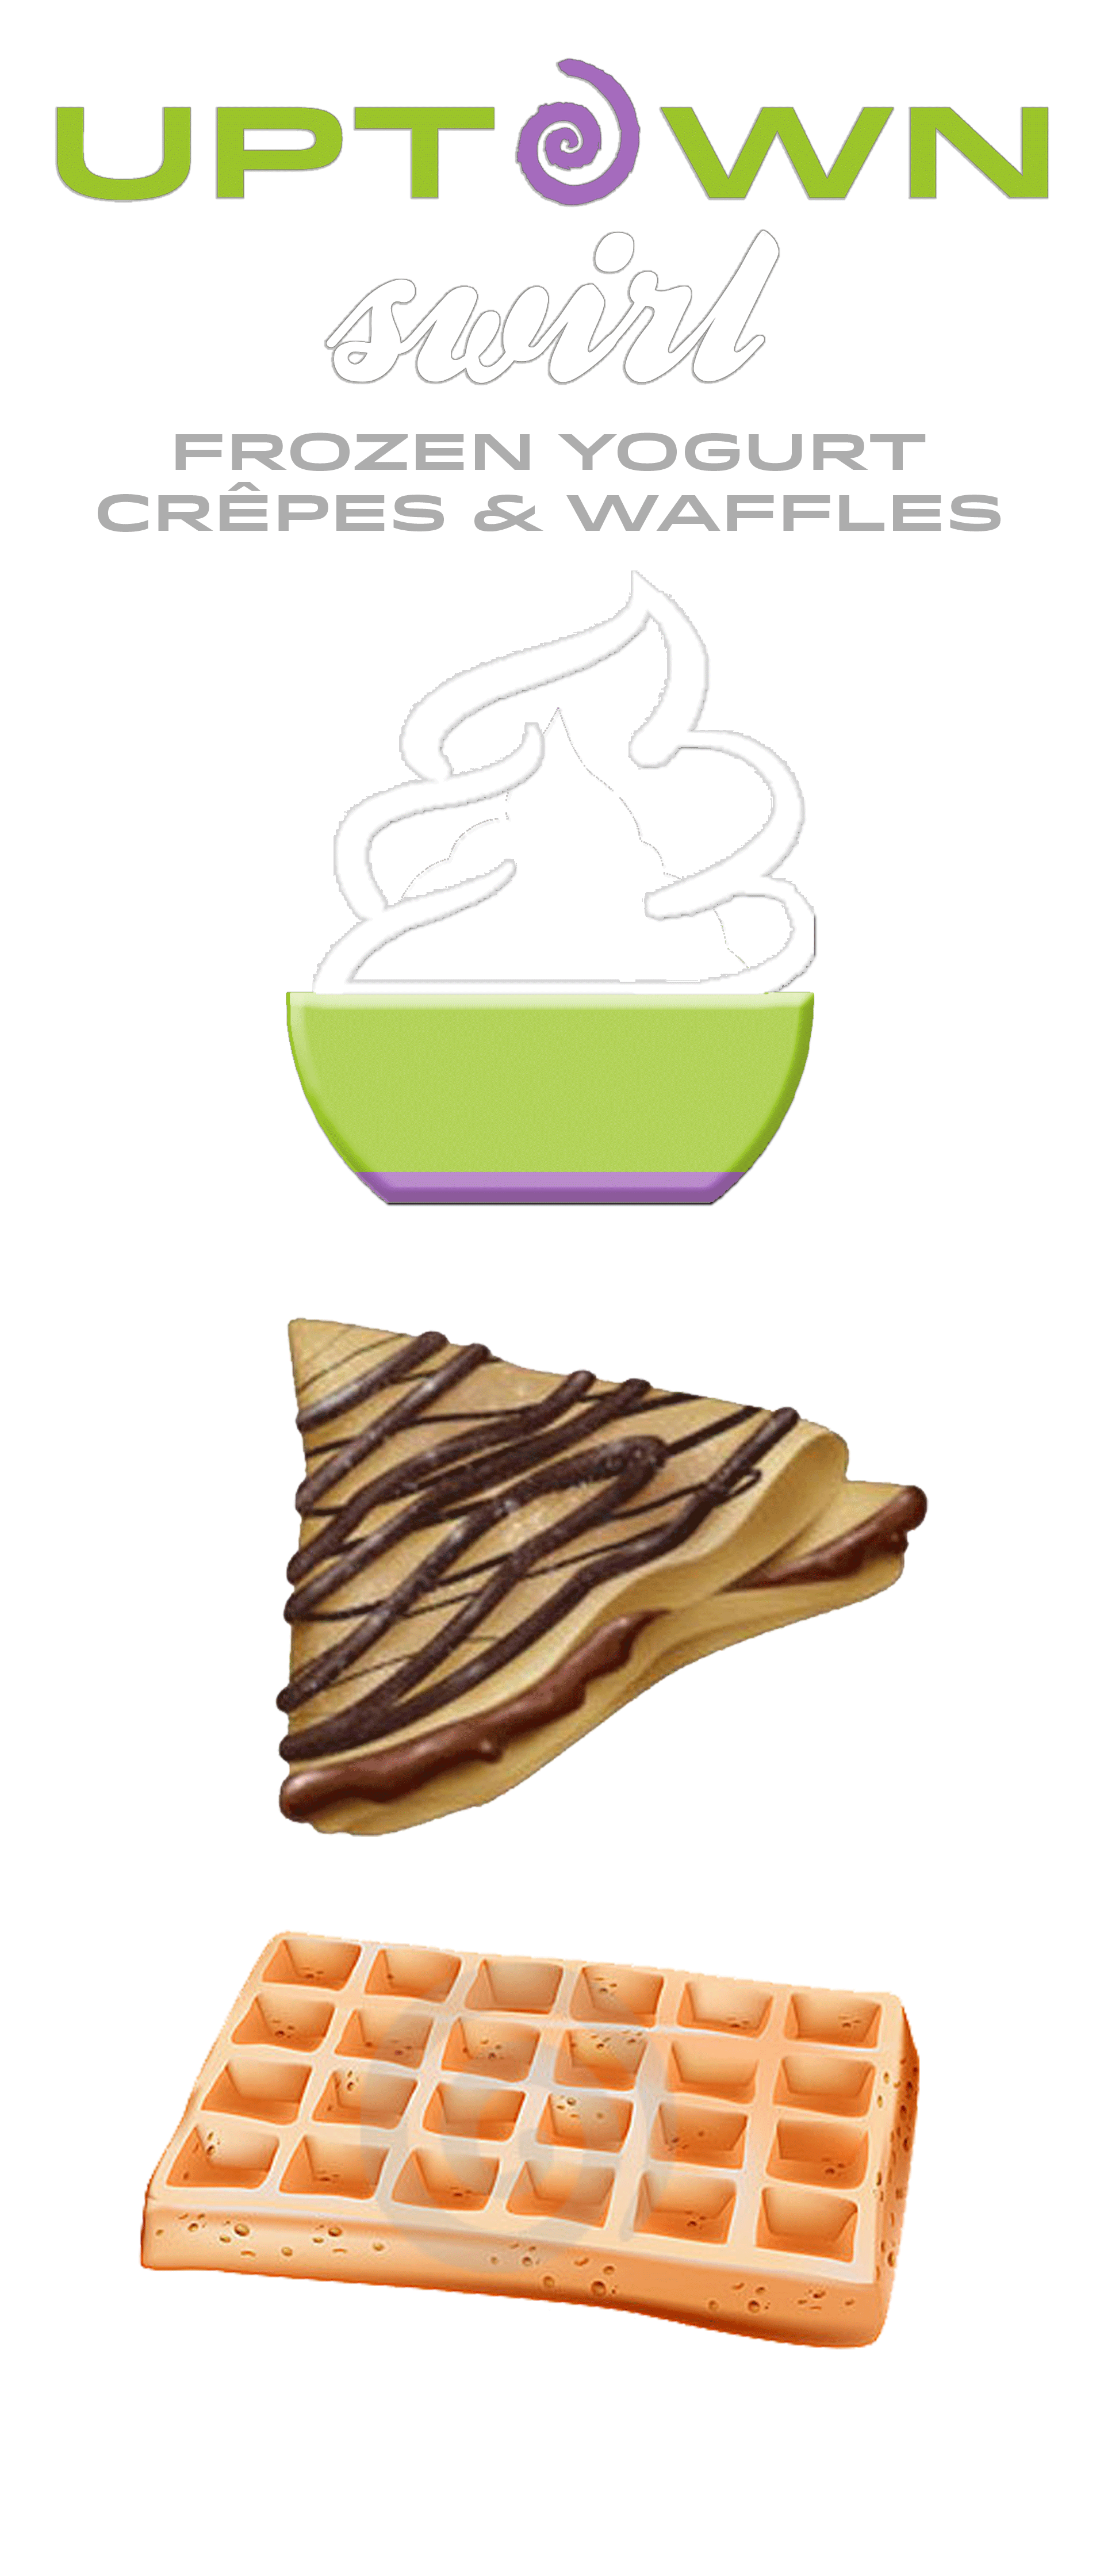 Uptown swirl we also. Waffle clipart crepe cake